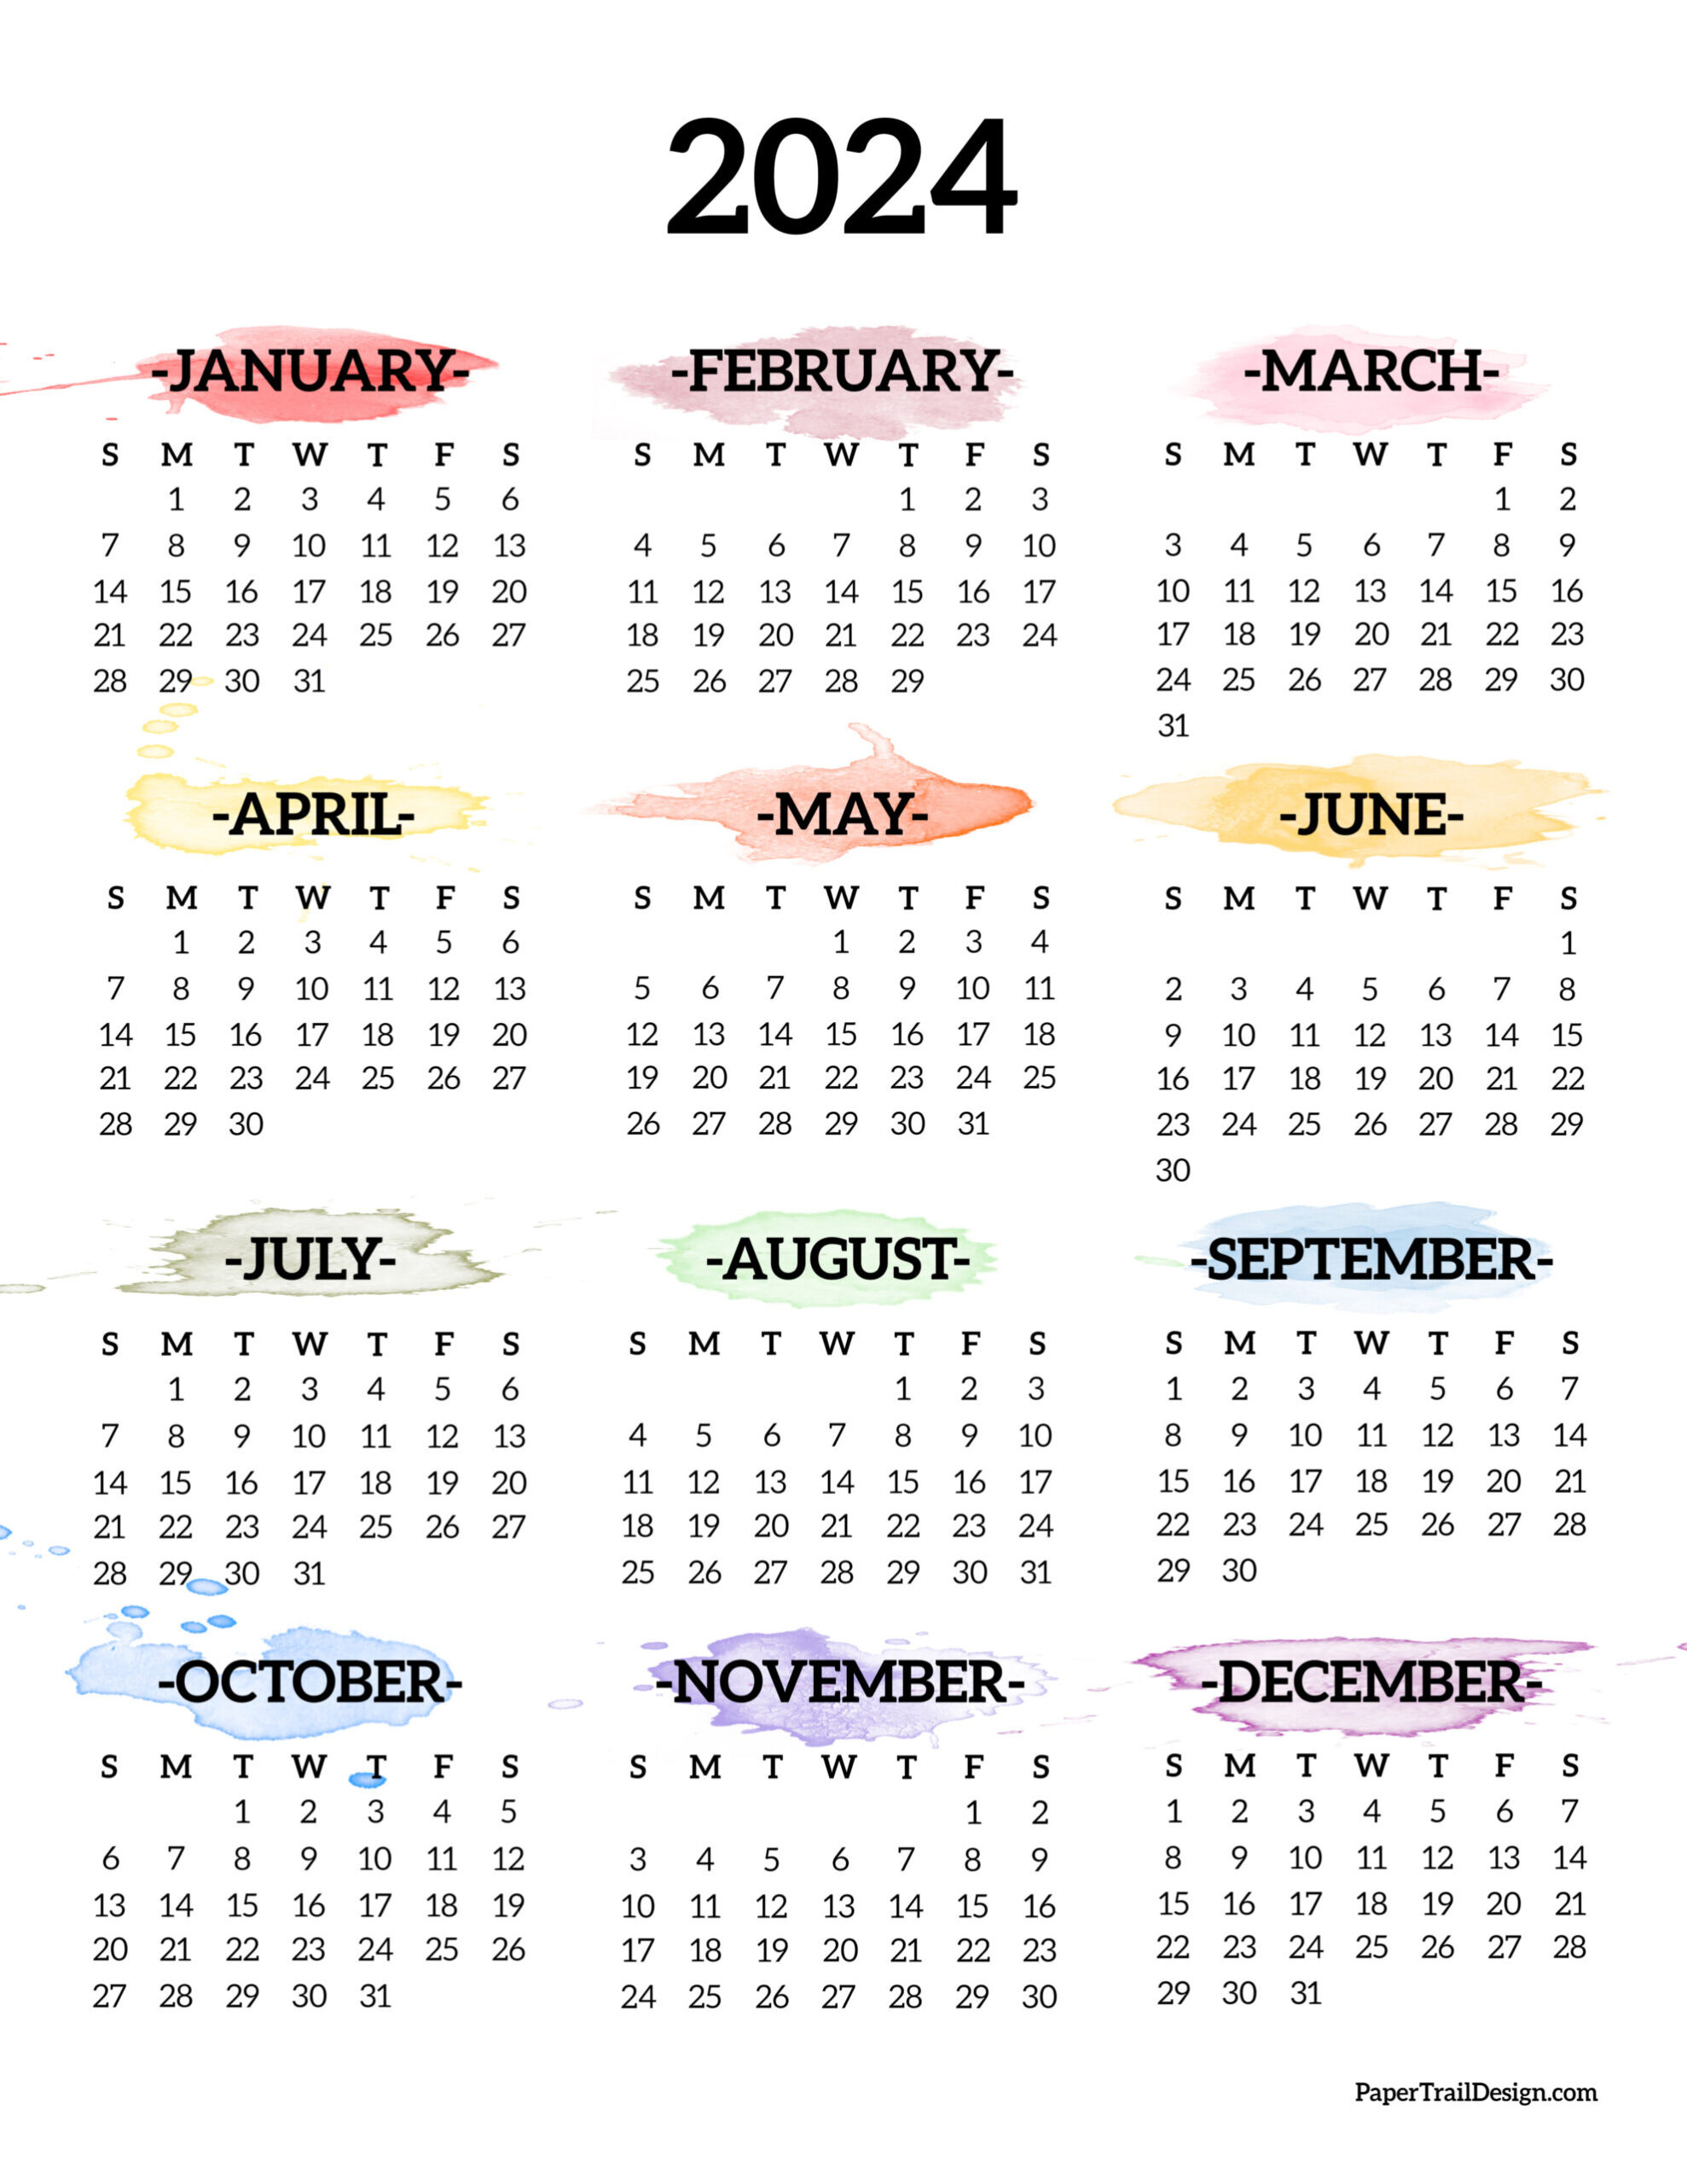 Calendar 2024 Printable One Page - Paper Trail Design for 2024 One Page Calendar Printable